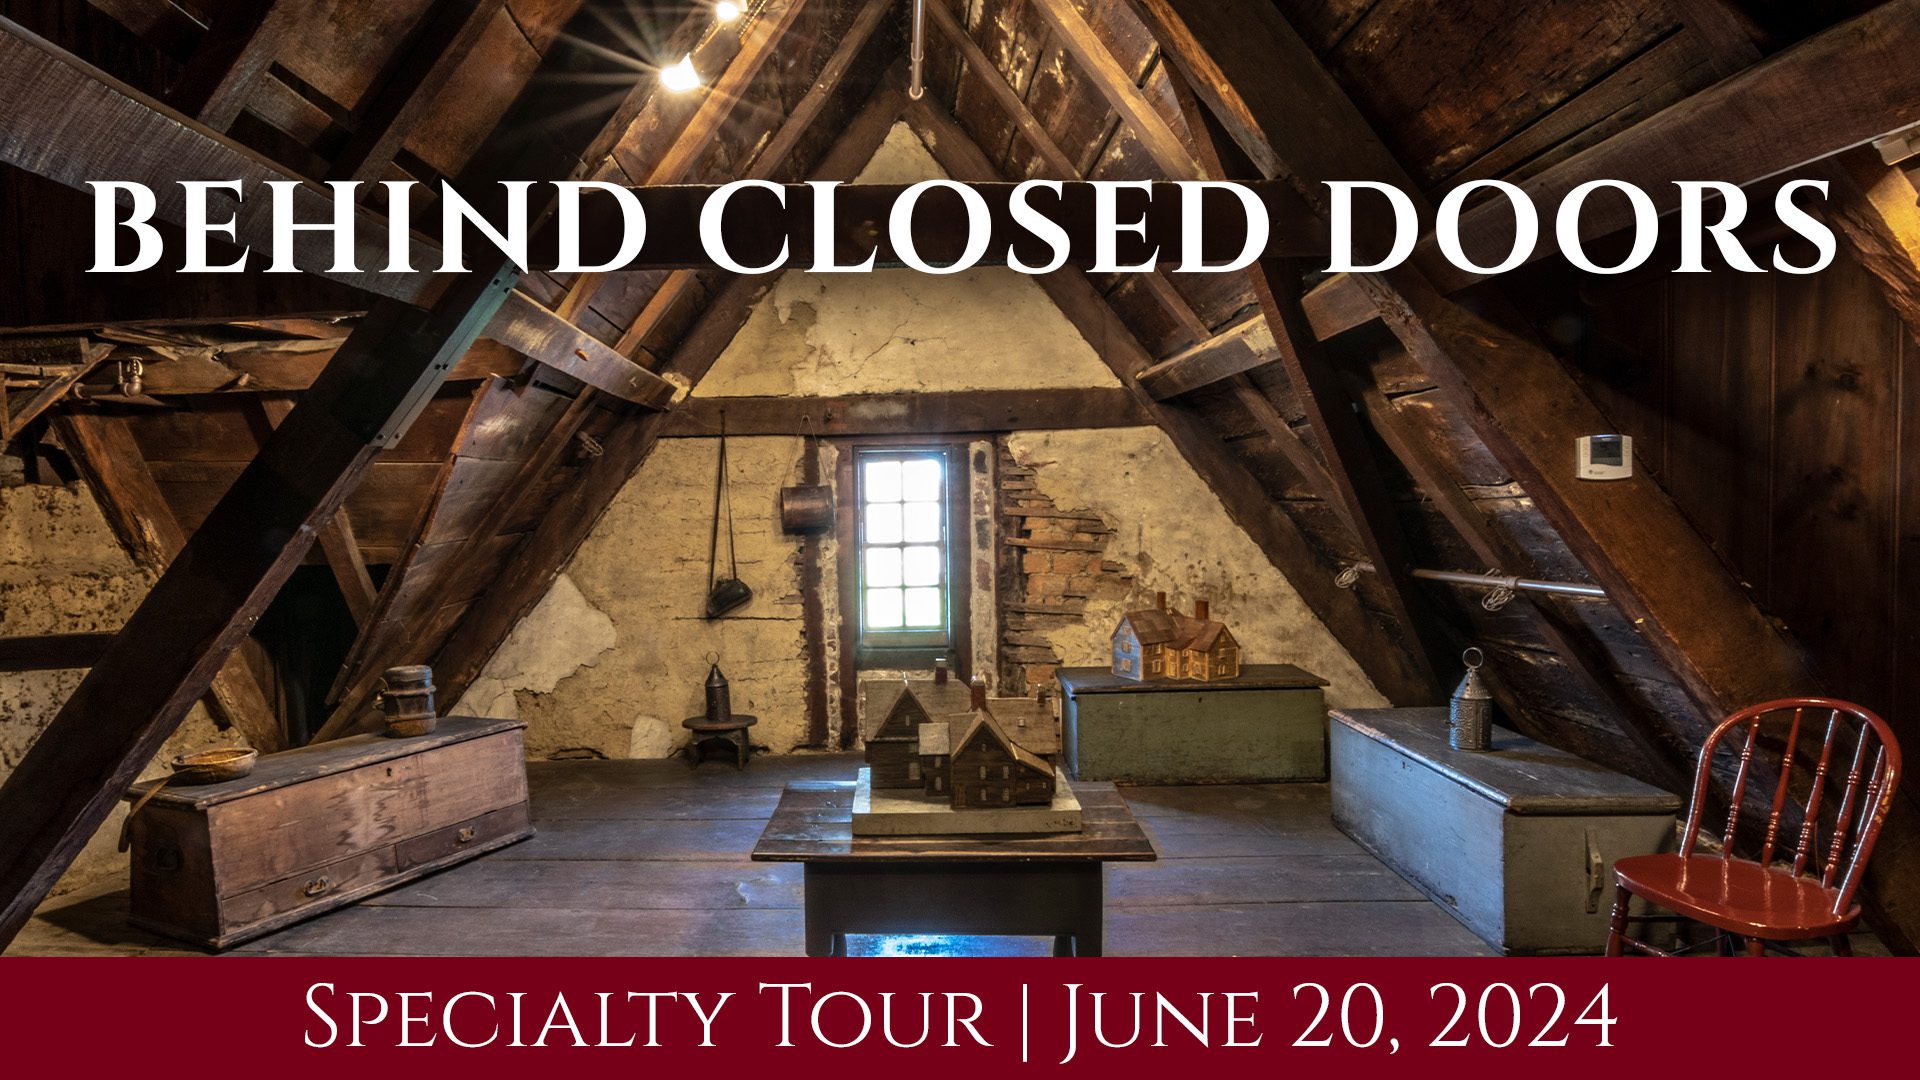 Discover the unseen: Behind-the-Scenes tour happening on June 20, 2024. Dive into undisclosed spots and unlock mysteries with us!